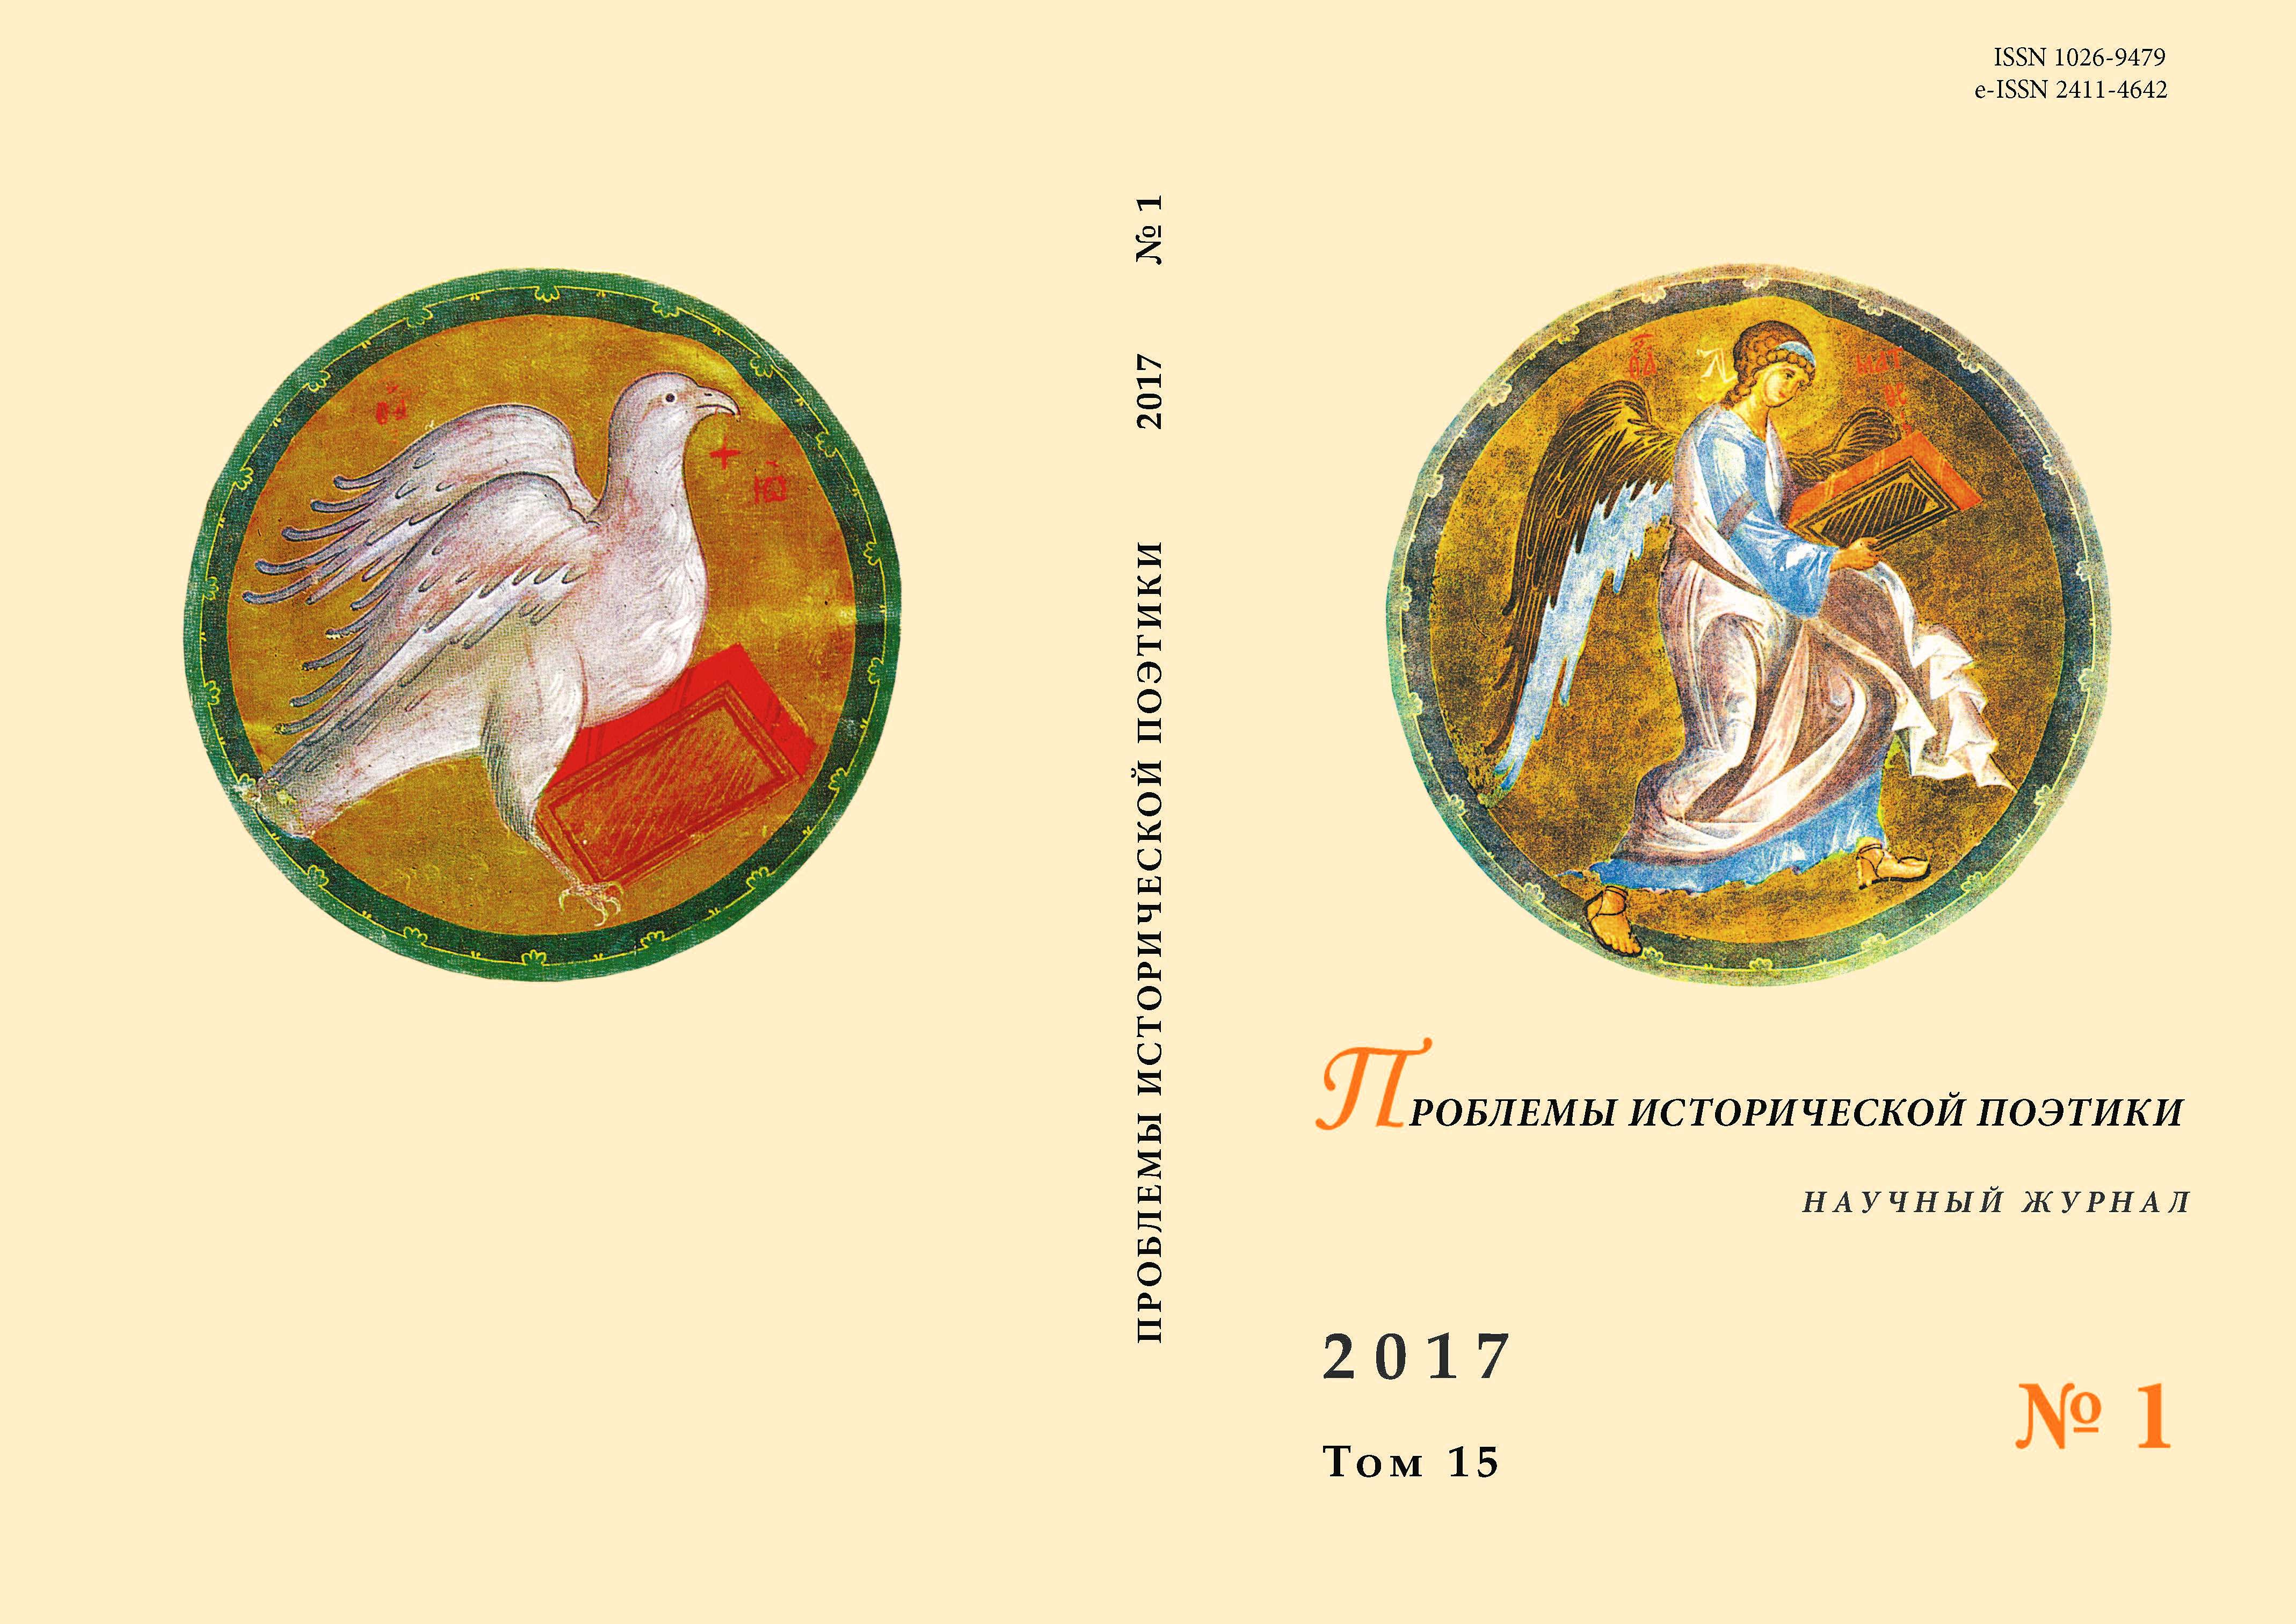 THE SEMANTICS OF COLORATIVES IN TOLSTOY’S NARRATIVES (“THE DEATH OF IVAN ILYICH”, “THE KREUTZER SONATA”, “THE DEVIL”) Cover Image